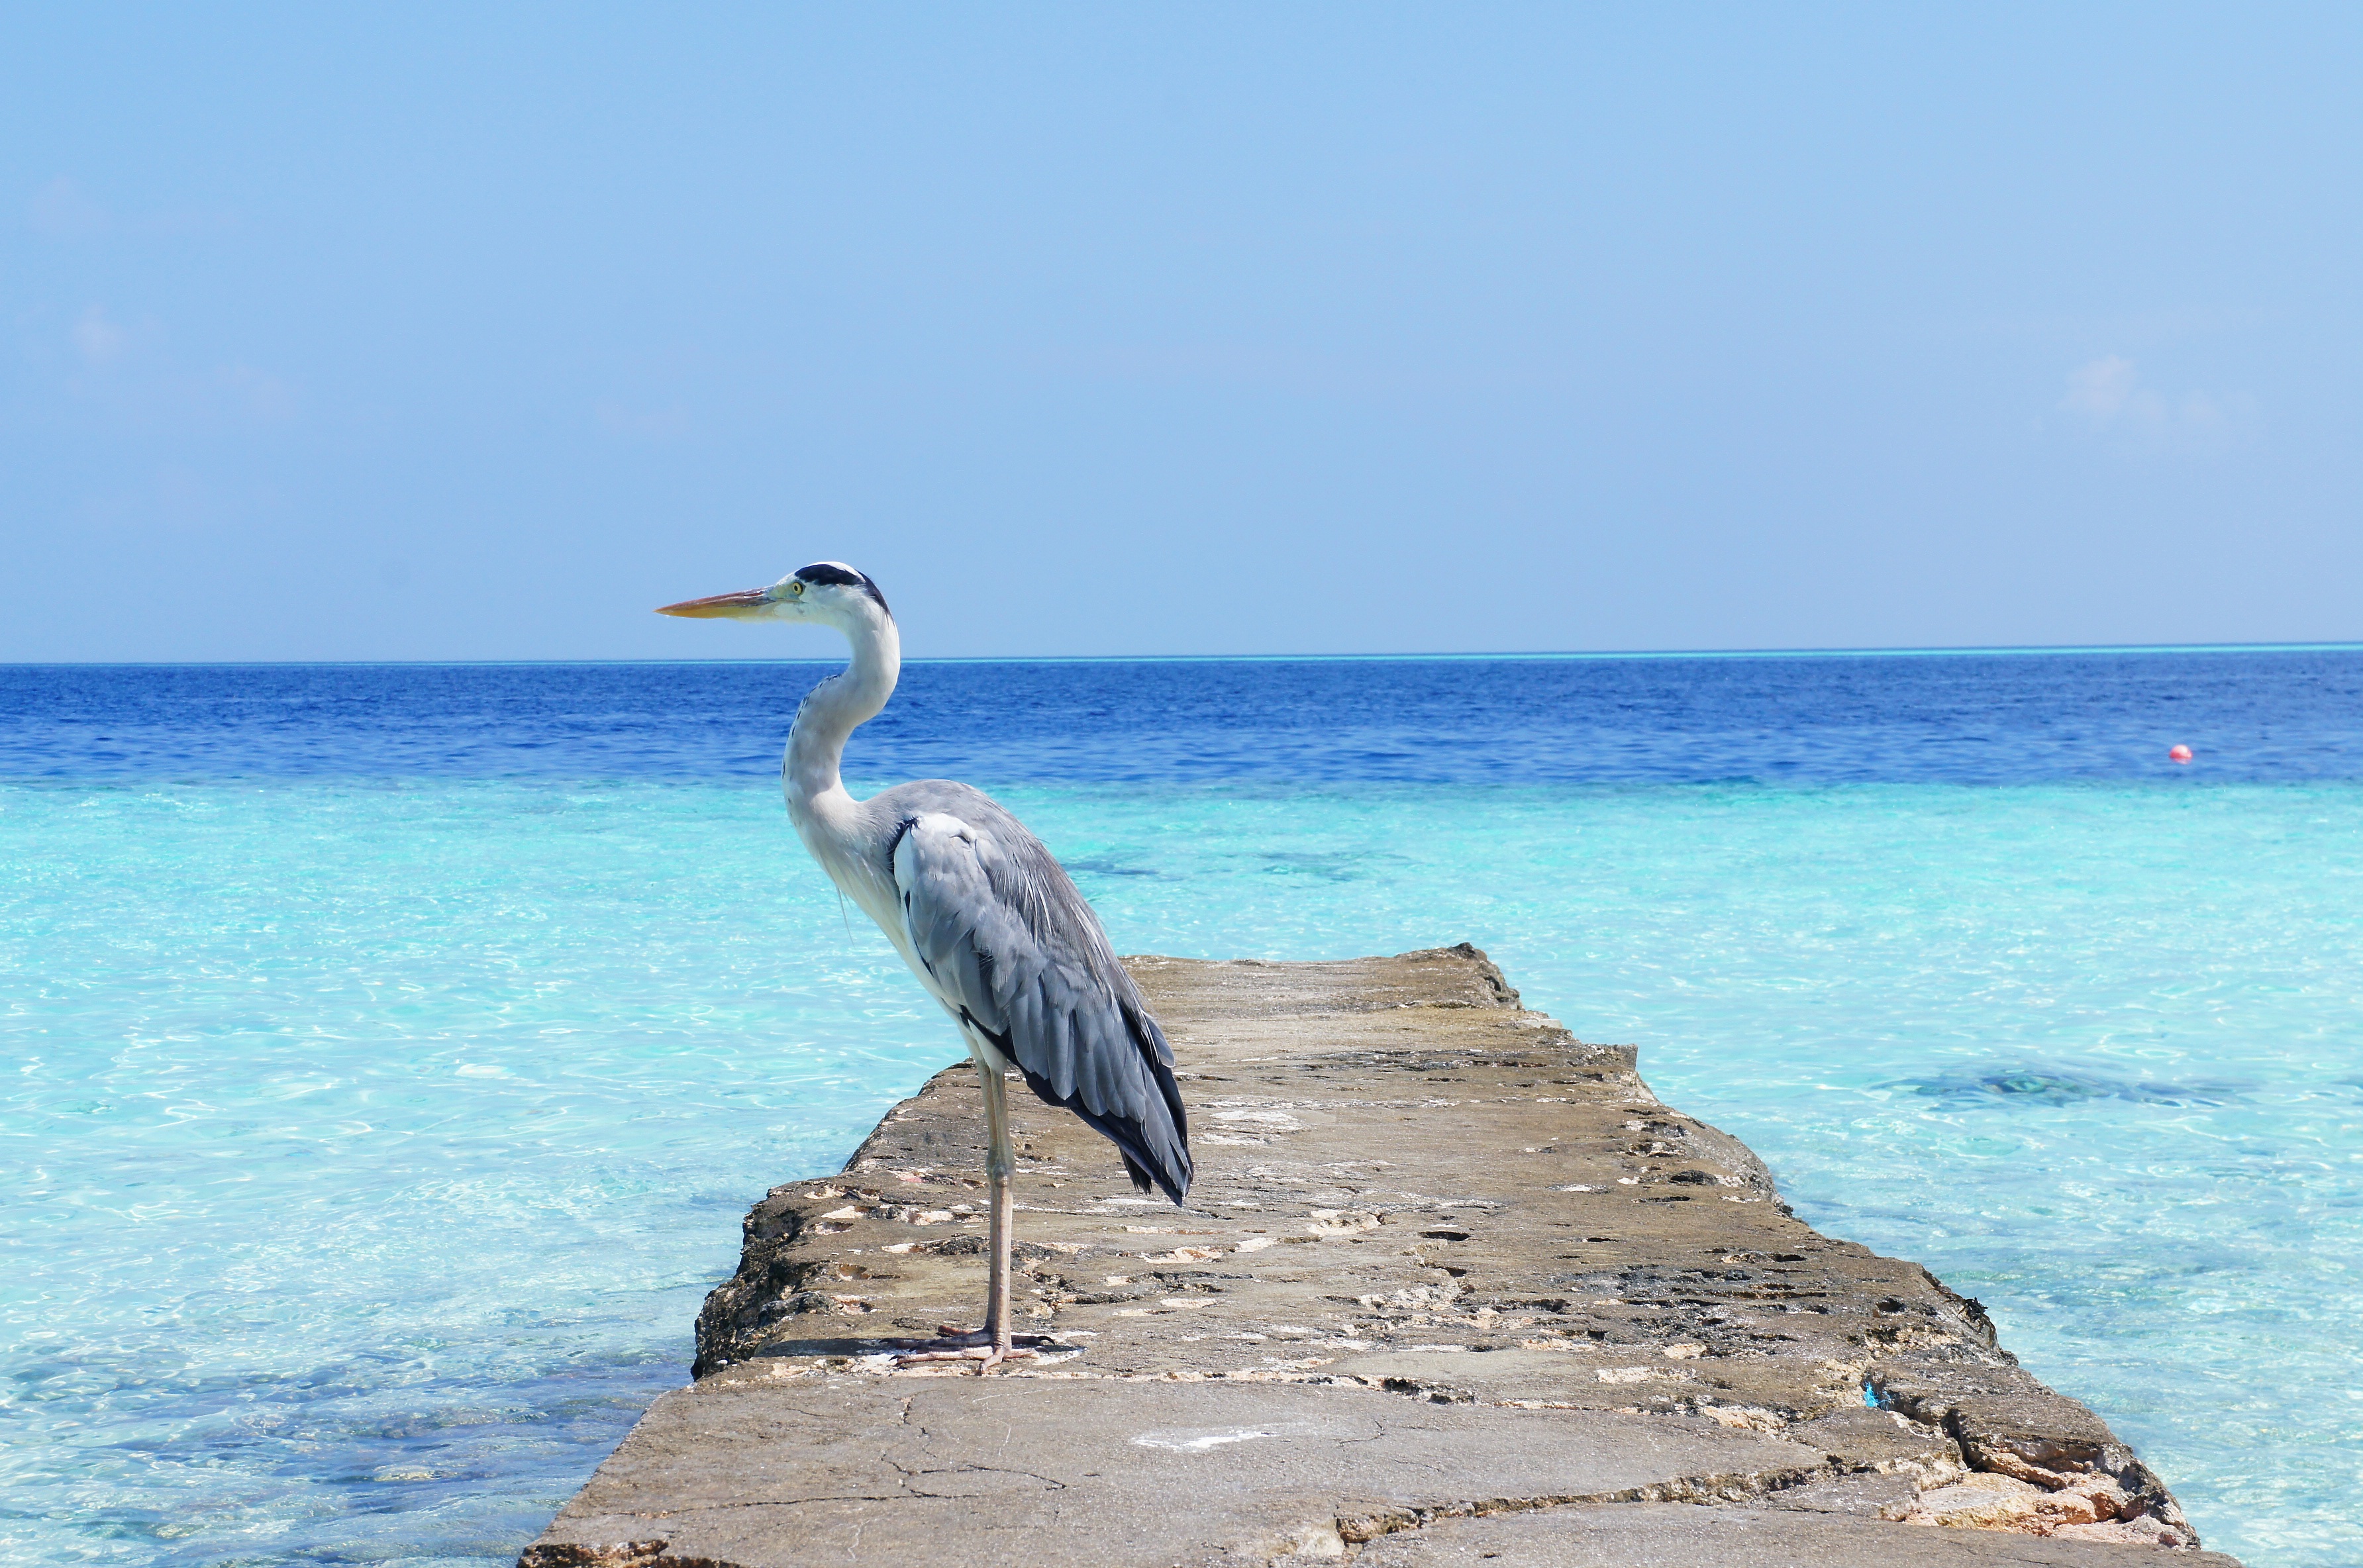 Heron watching out over tropical water